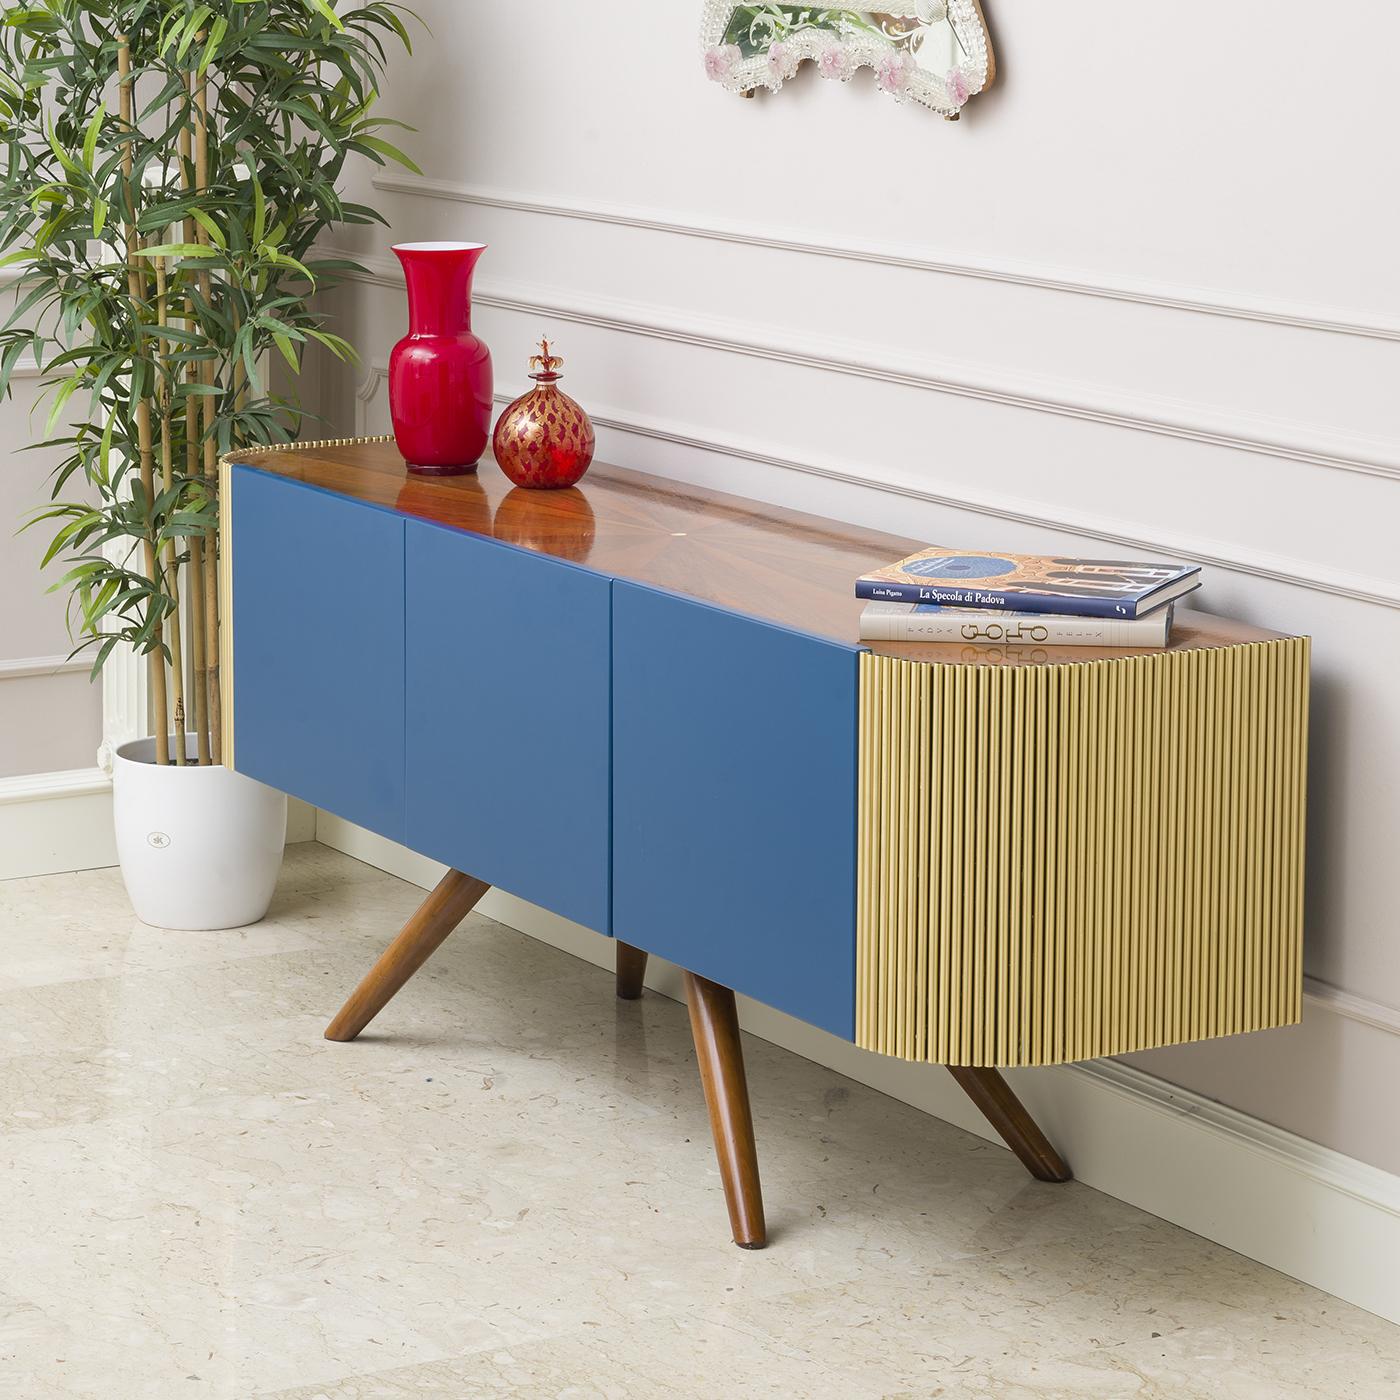 A modern and innovative designed sideboard that has a wooden body and a radial walnut top with mother of pearl carved into the center. The legs are made of walnut, while the wooden doors are lacquered blue. In contrast the sides are in brushed